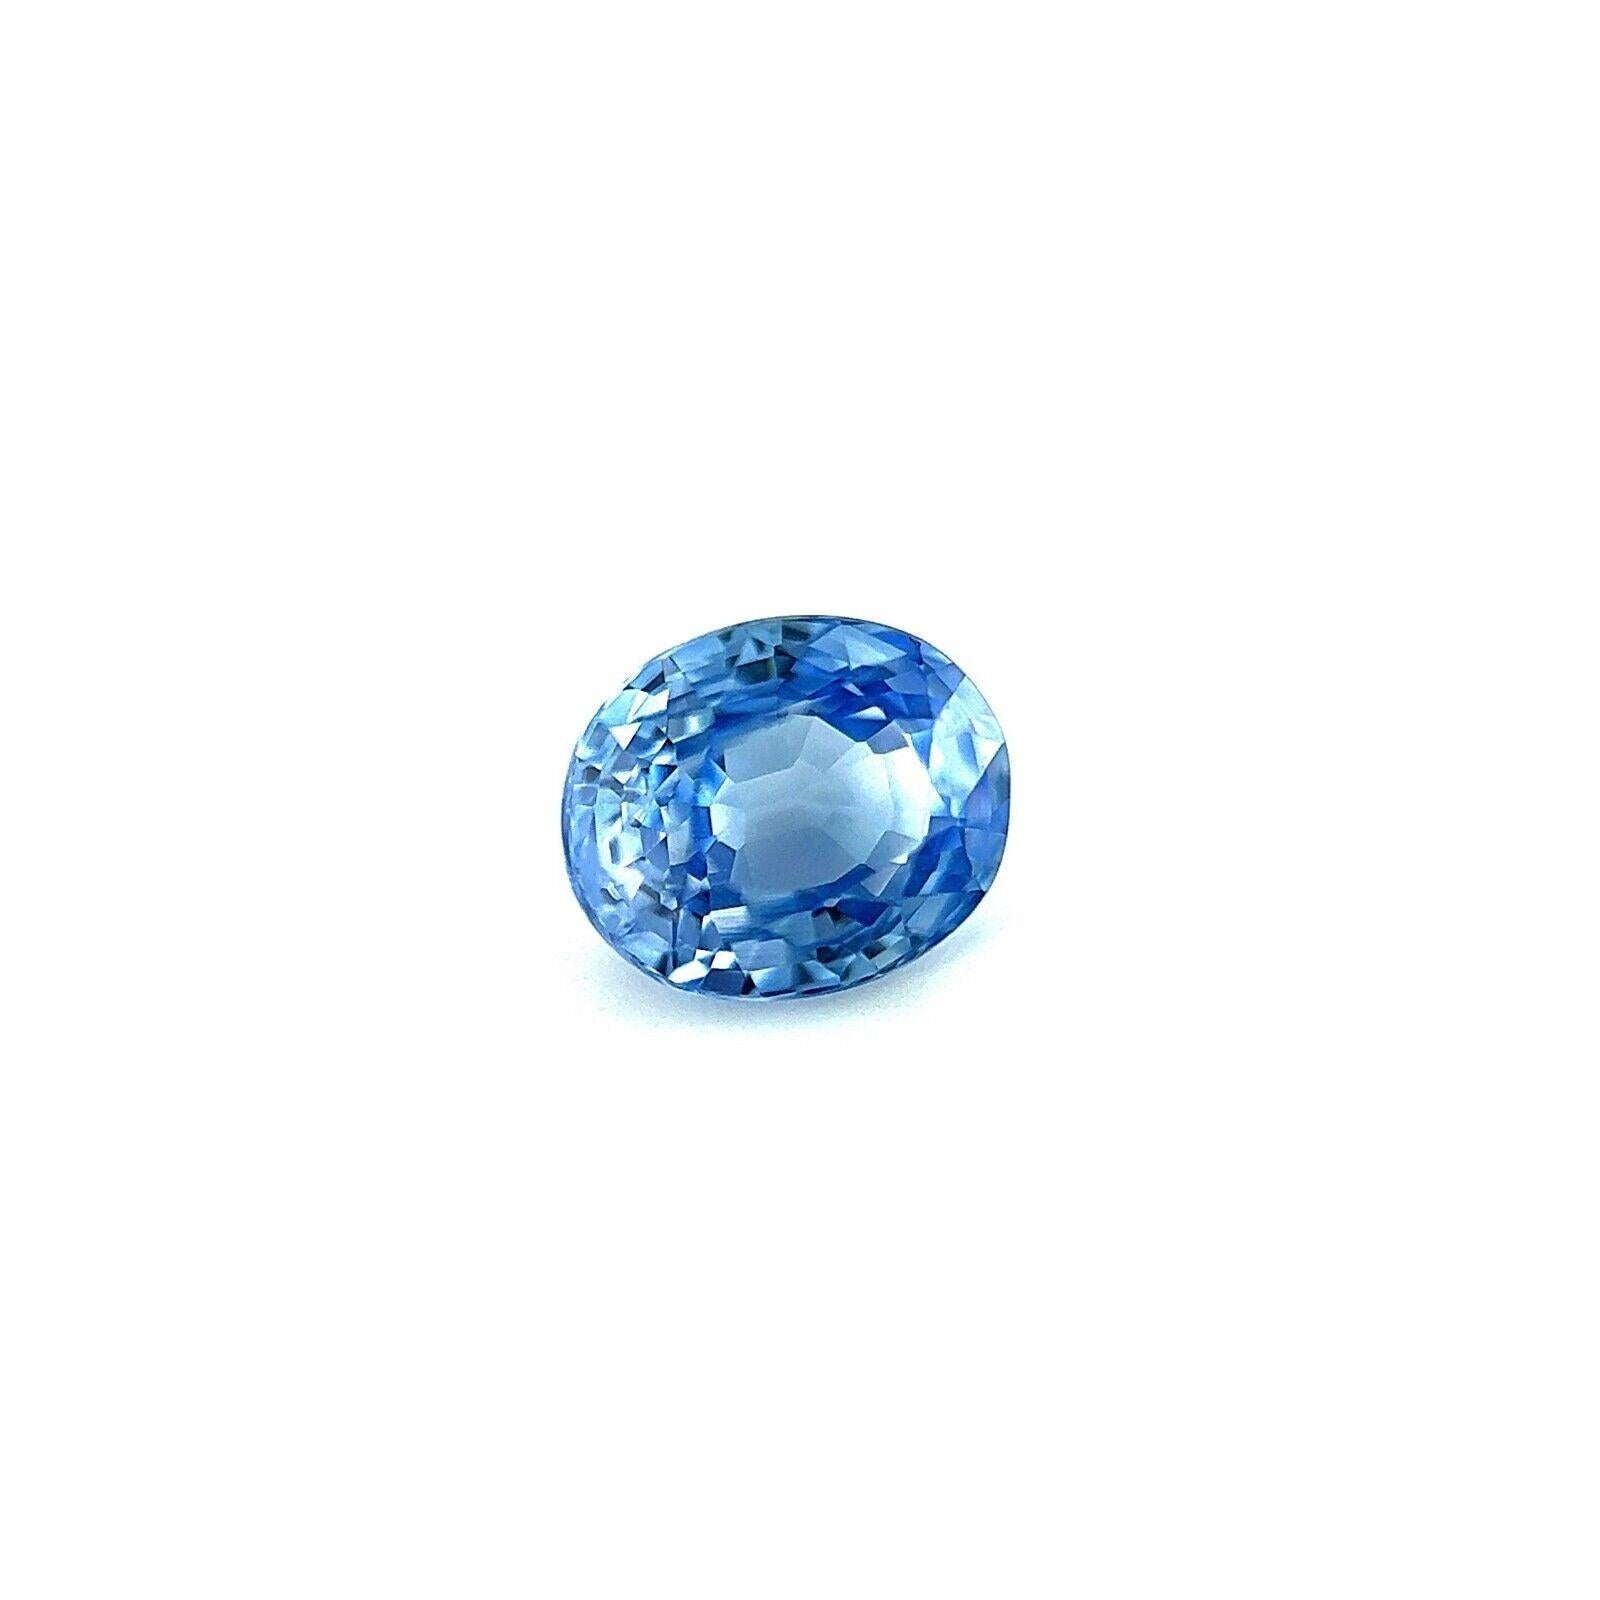 Fine Vivid Blue Ceylon Sapphire 0.89ct Oval Cut Rare Loose Gem 5.8x4.8mm VVS

Fine Natural Blue Ceylon Sapphire Gemstone.
0.89 Carat with a beautiful blue colour and excellent clarity, VVS.
Also has an excellent oval cut and polish to show great